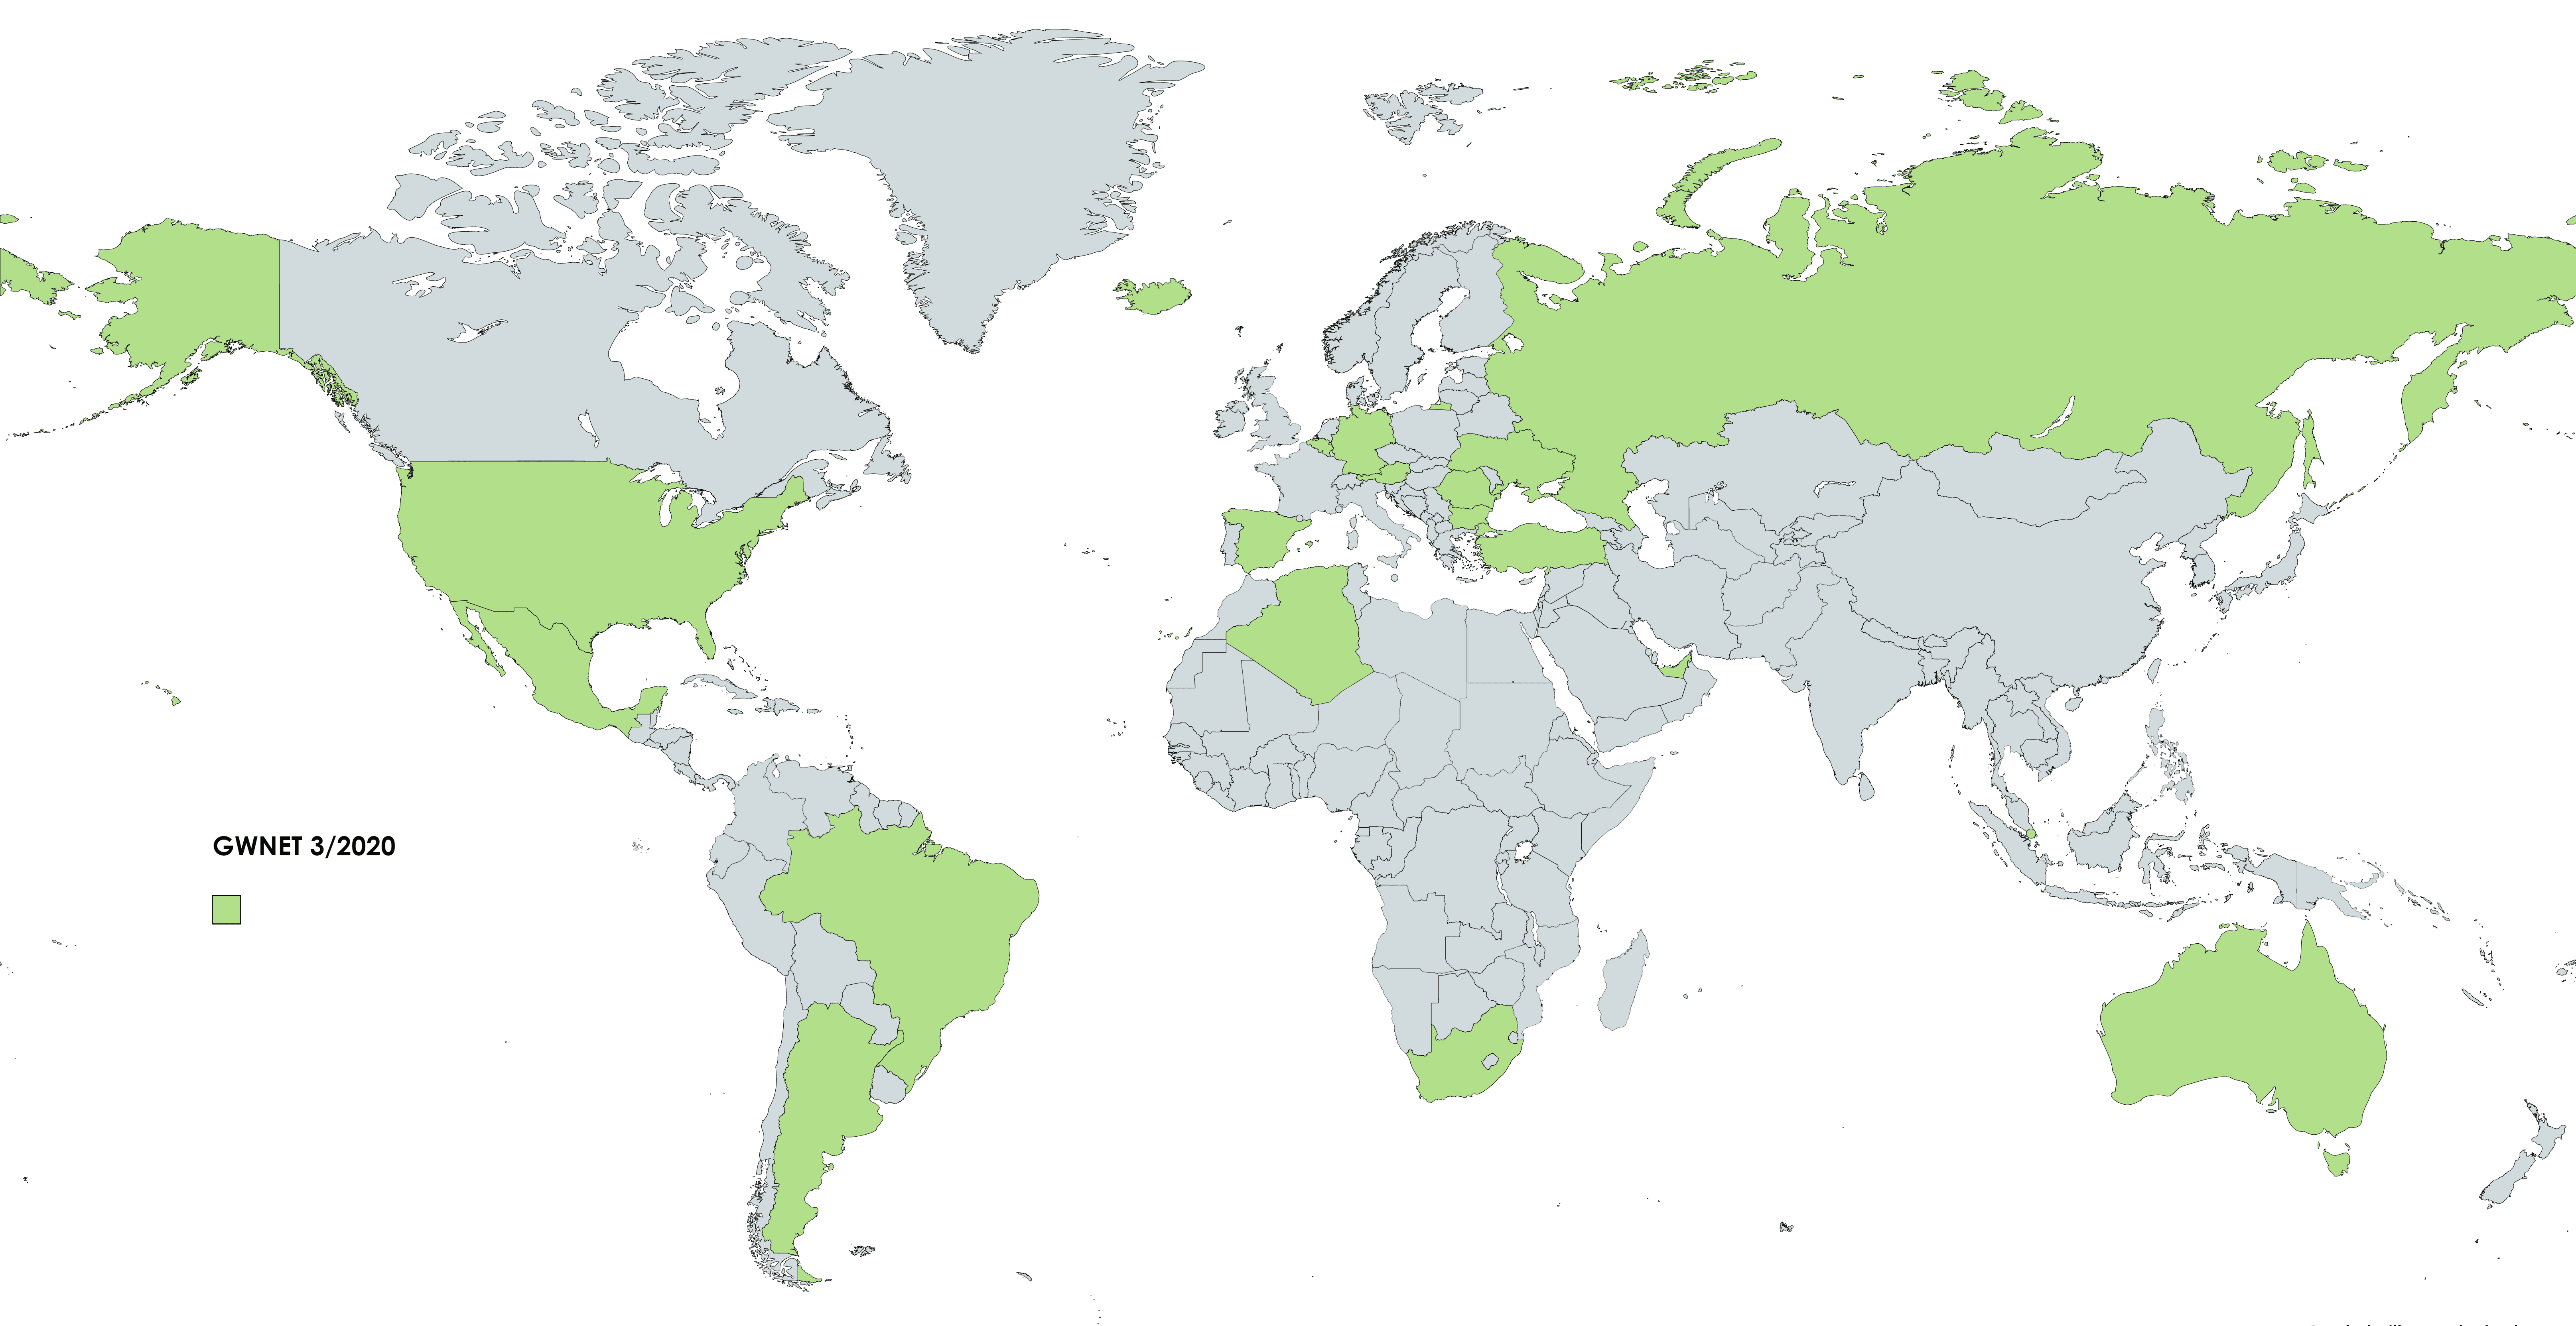 Mentor Countries for GWNET 3/2020 programme